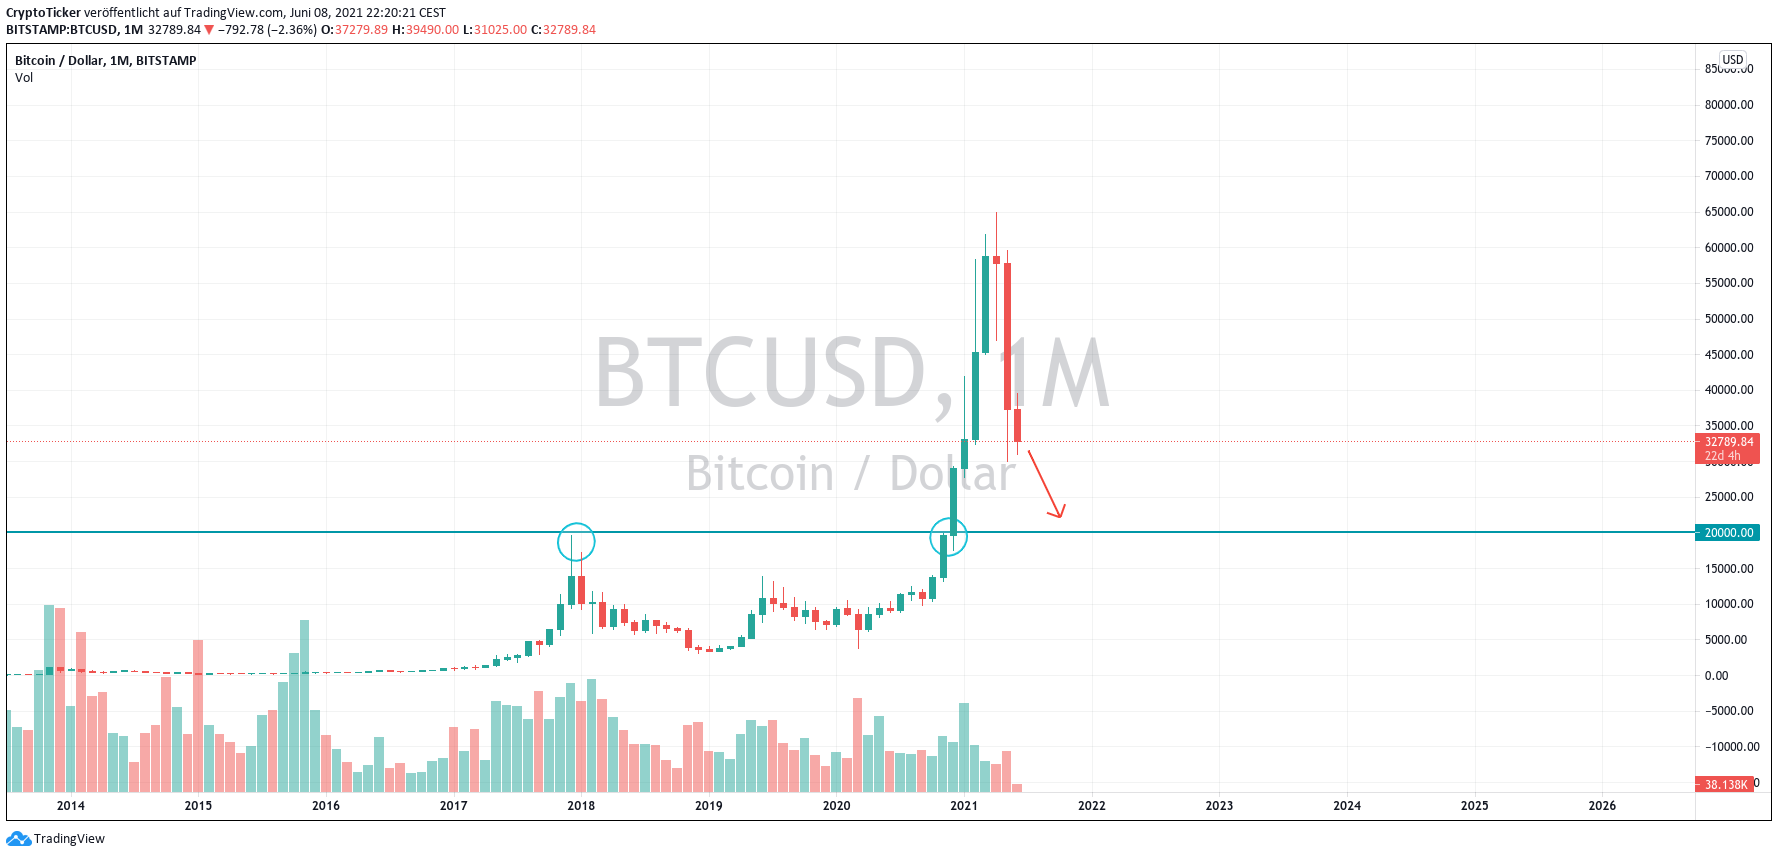 BTC/USD 1-Month chart showing Bitcoin's cycle